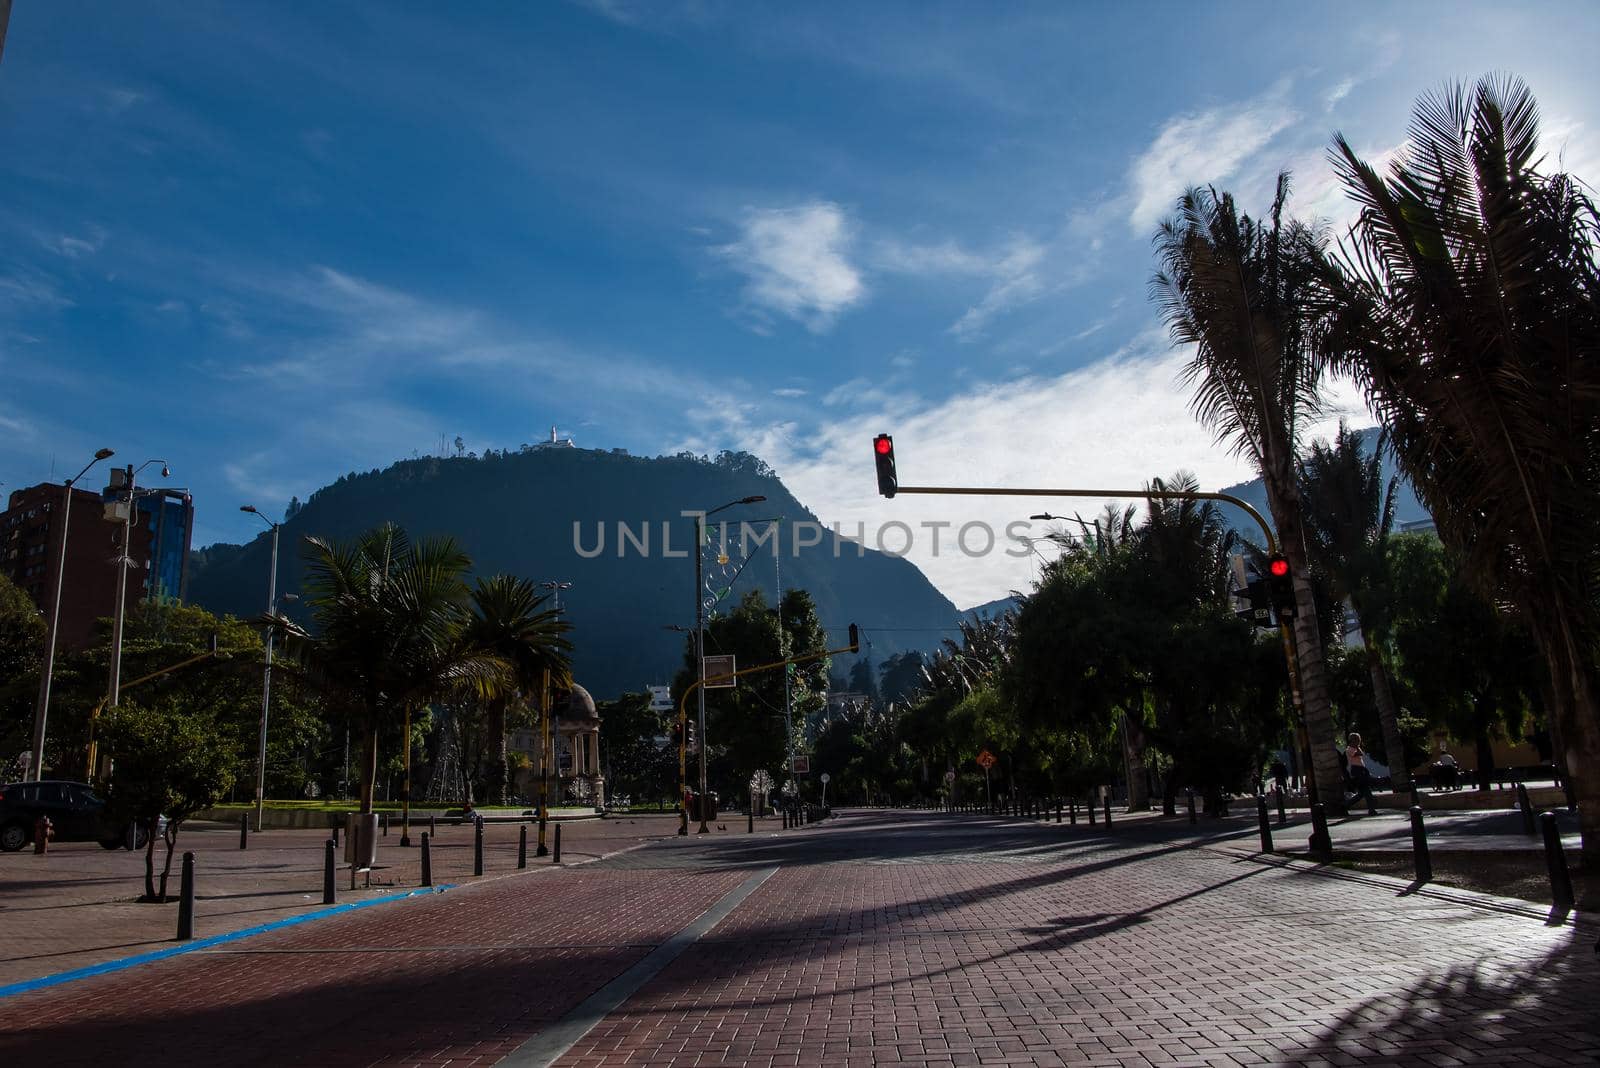 Mount Monserrate Colombia with traffic light in the foreground.